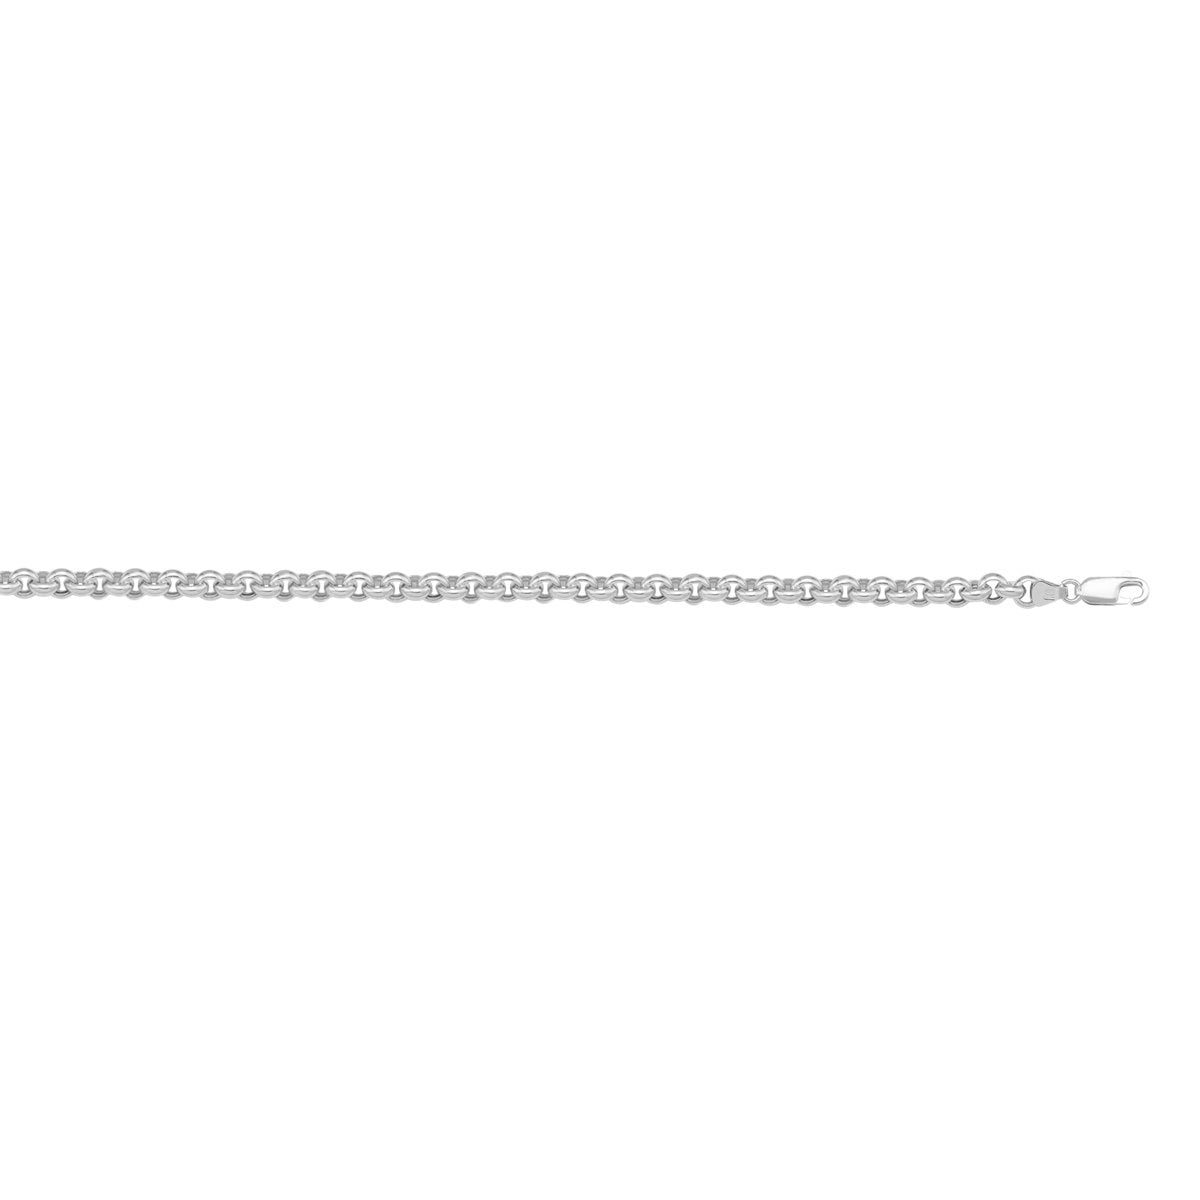 BRACELETS WHITE GOLD HOLLOW ROLO LINK (LOBSTER CLASP) CHAIN